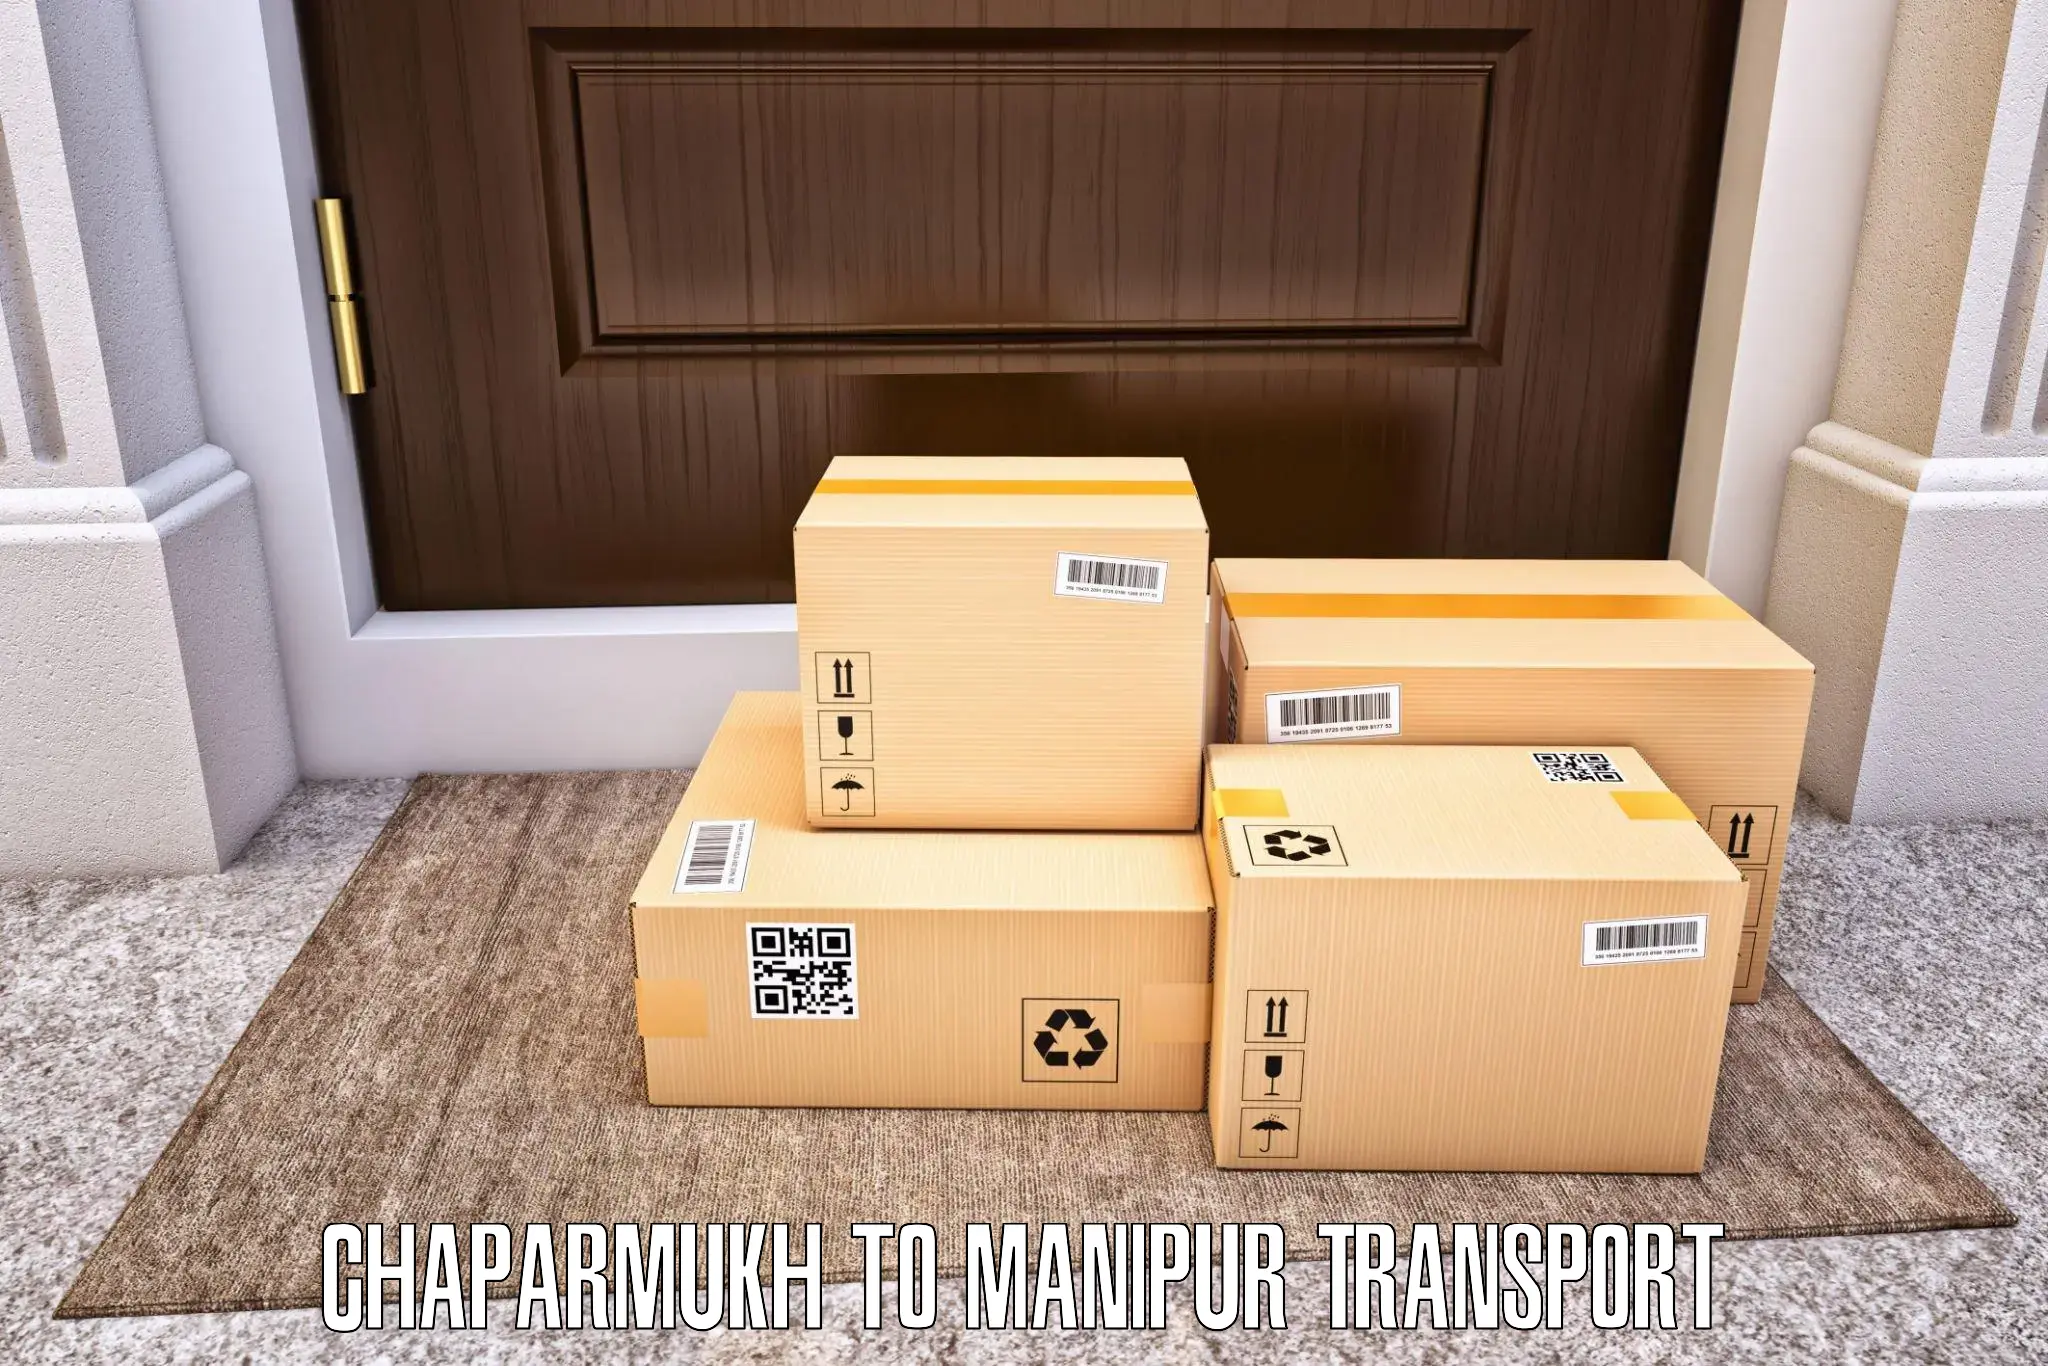 Transportation solution services Chaparmukh to Kakching